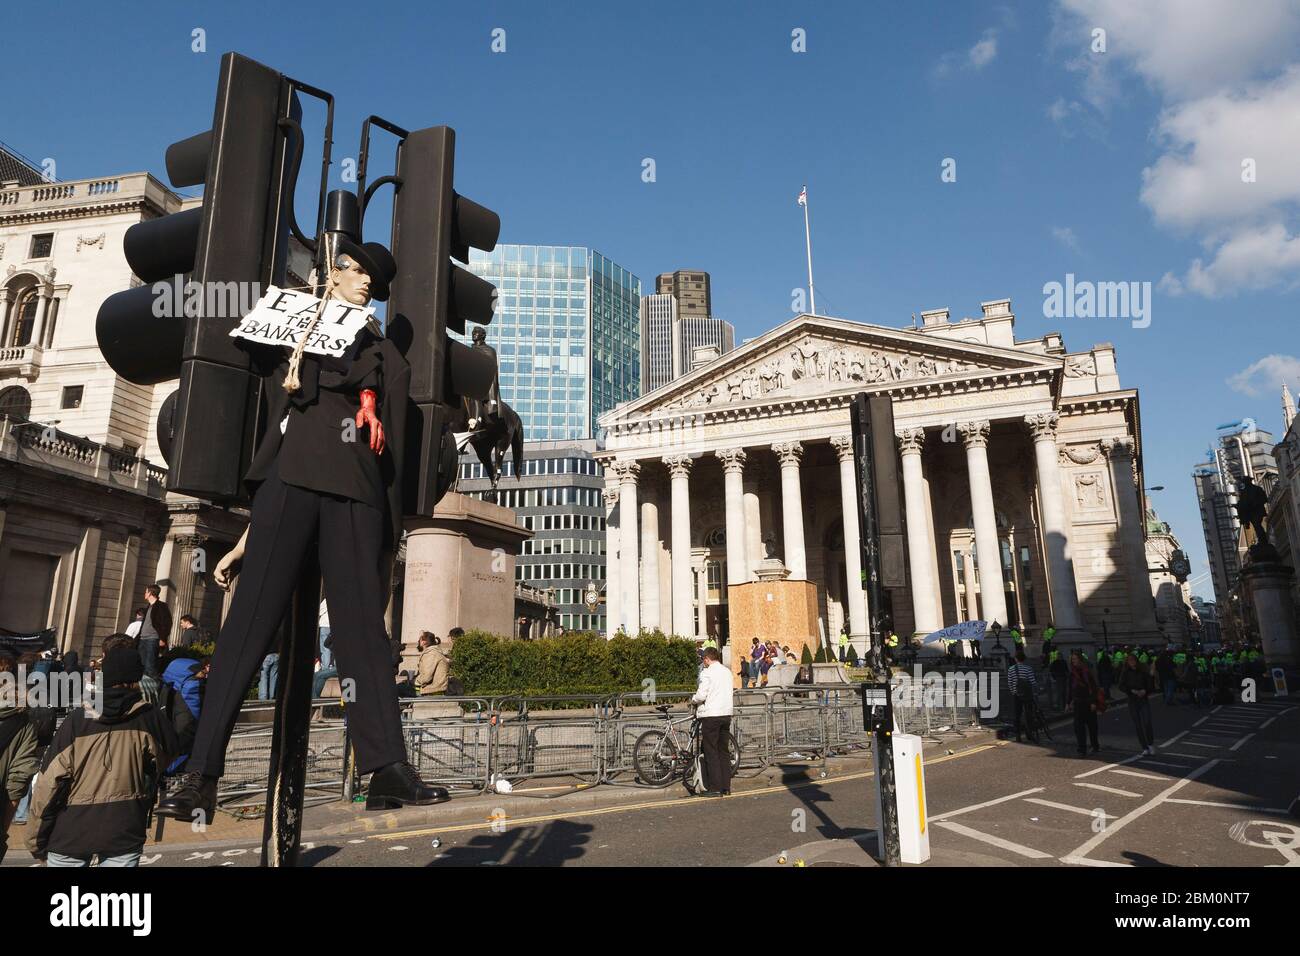 Anti G20 protests, an effigy of a banker hanging in front of Bank of England (left) and the Royal Exchange (center), City of London, UK.  1 Apr 2009 Stock Photo